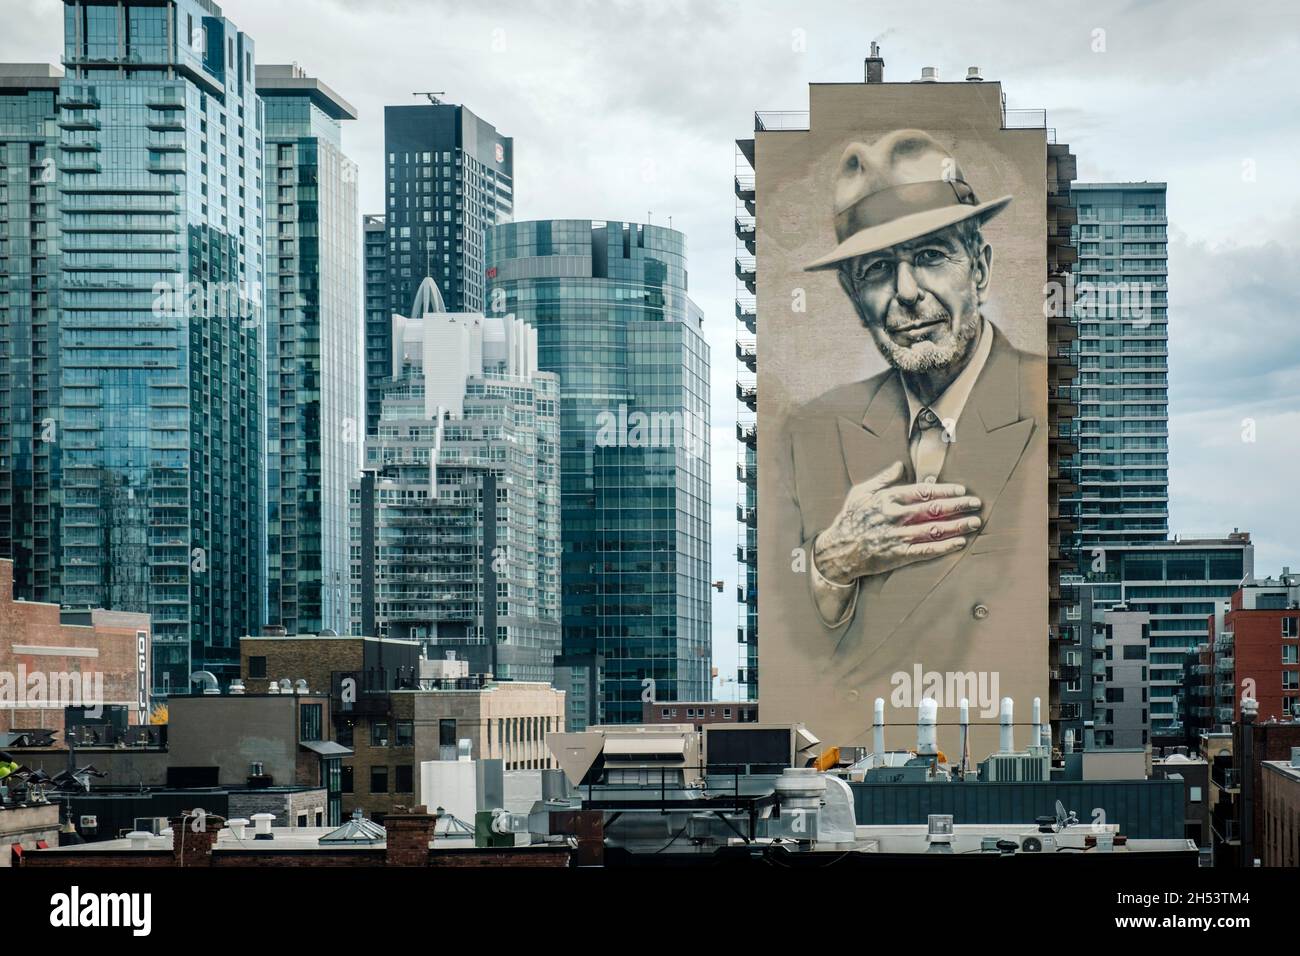 Leonard Cohen commemorative mural 'Tower of Songs' painted by artist El Mac and Gene Pendon on Crescent Street, Montreal, Quebec, Canada Stock Photo